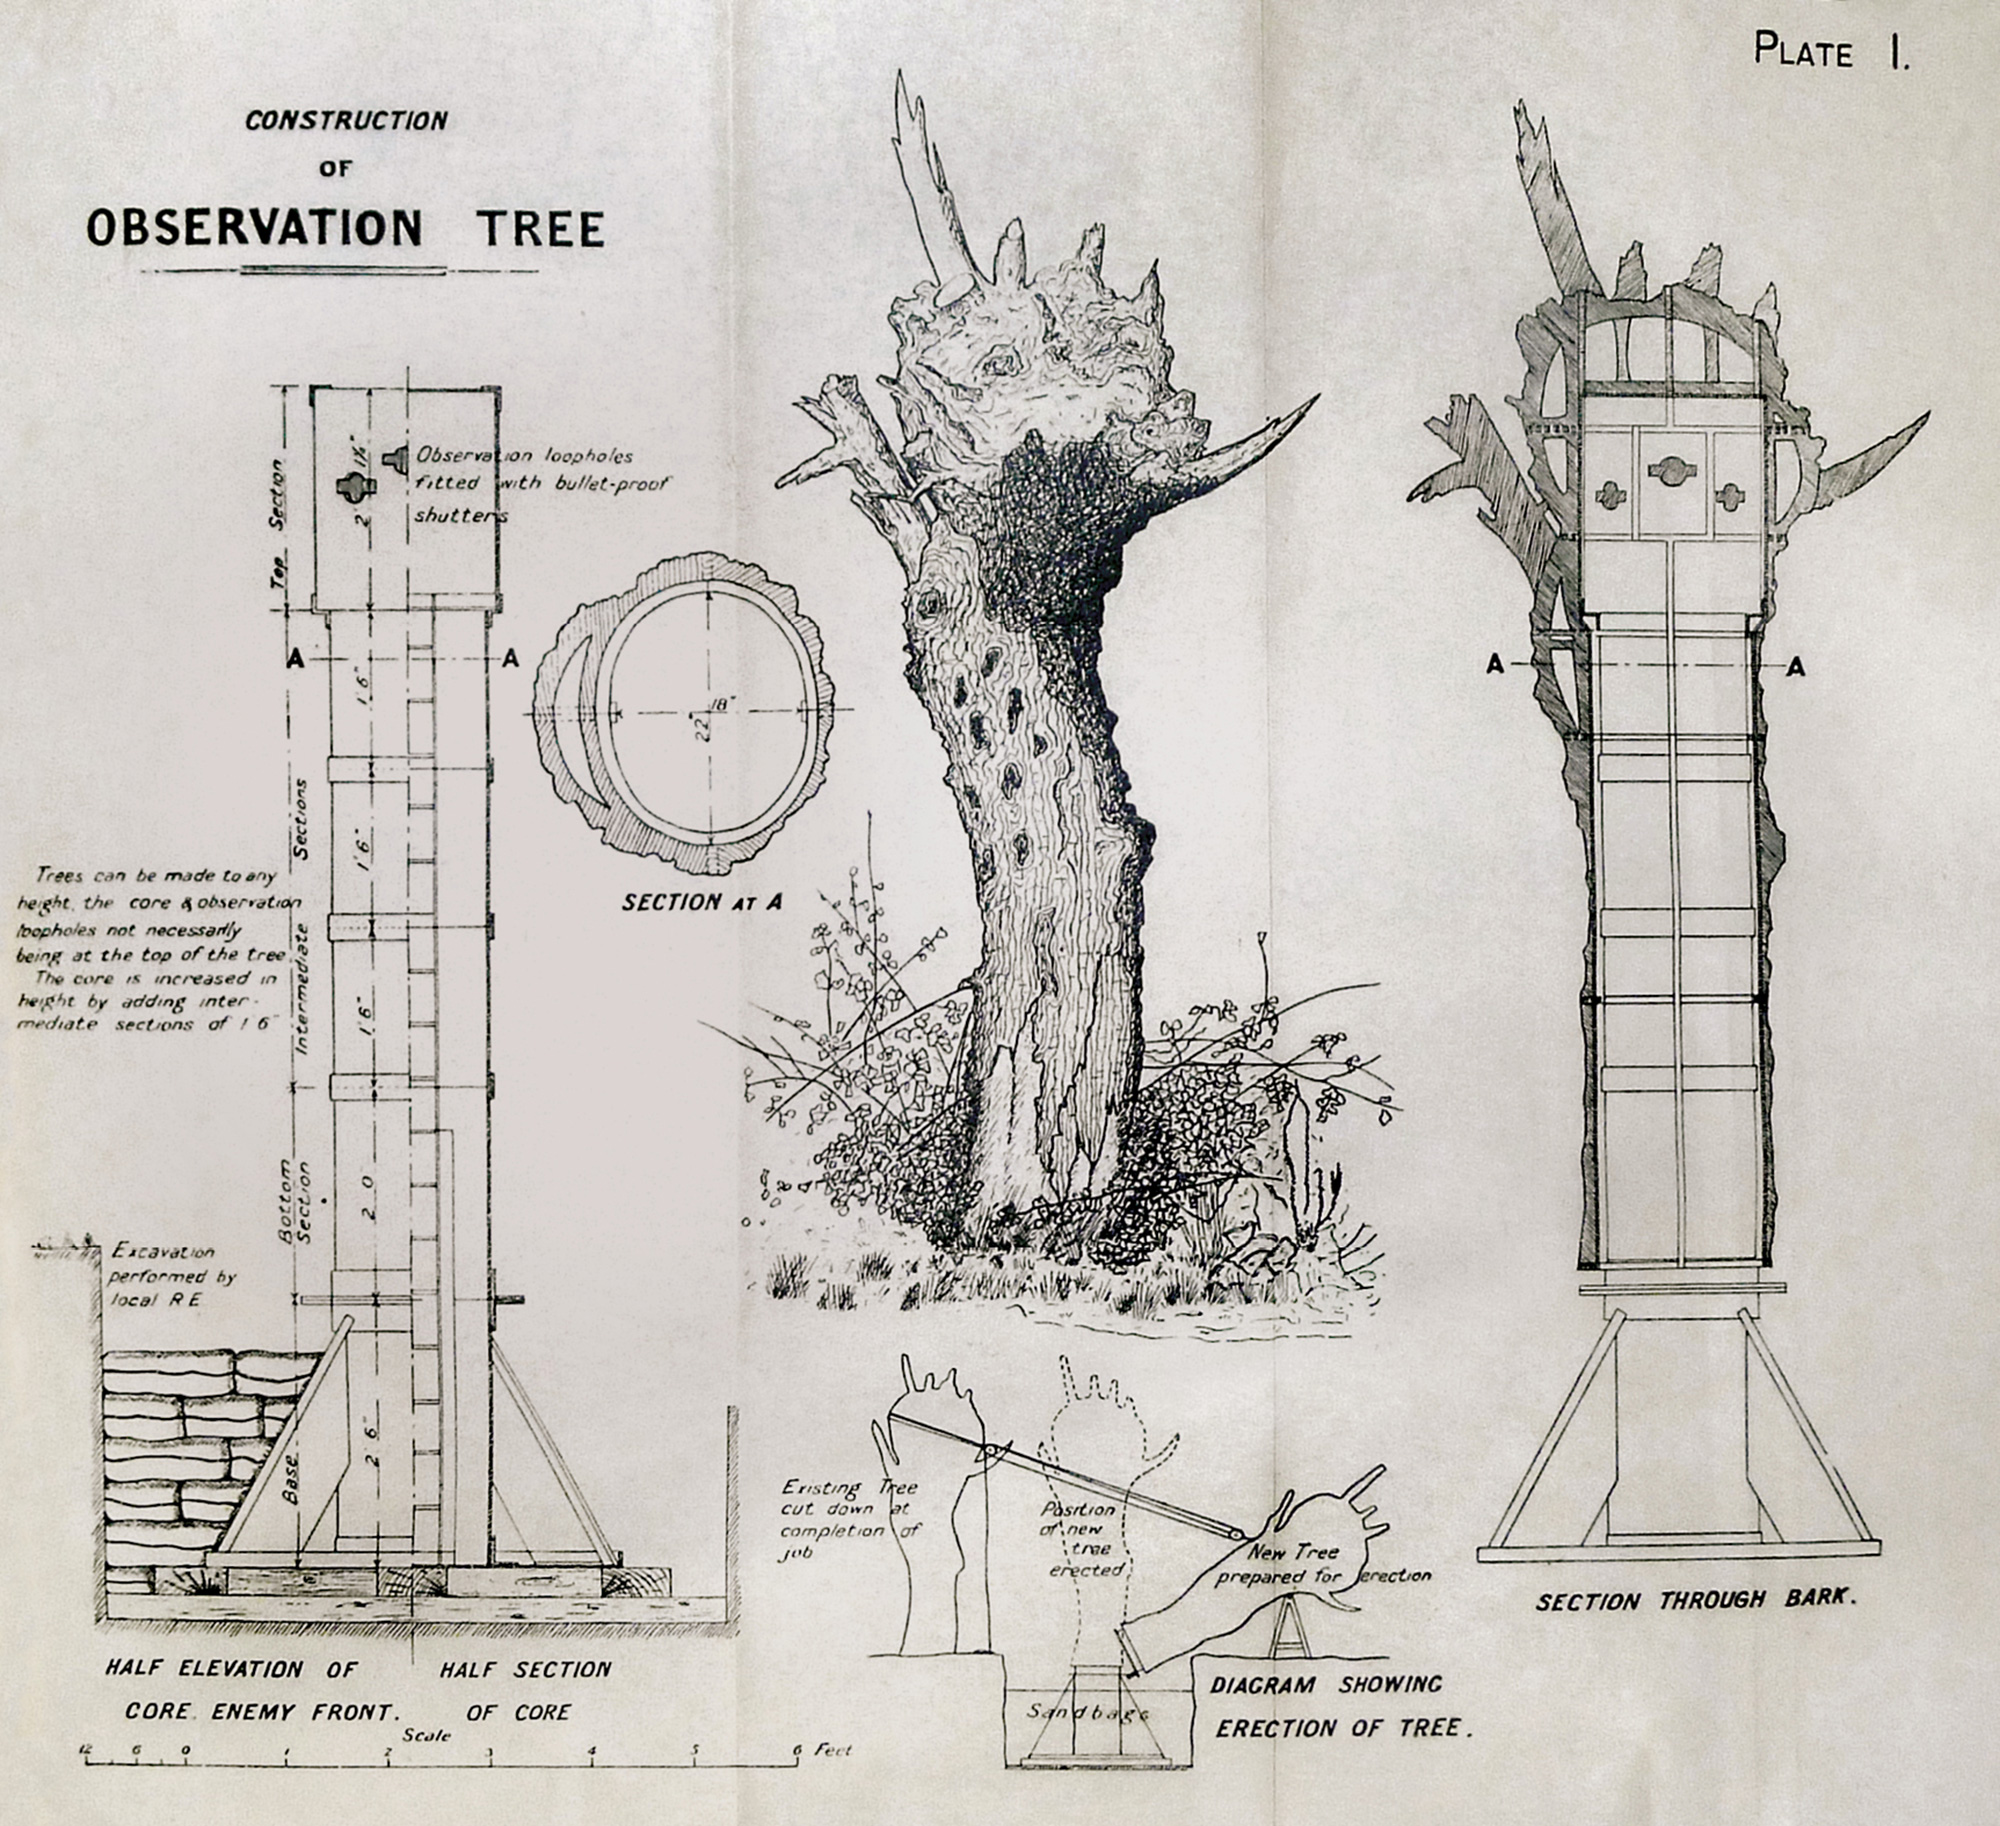 British Royal Engineers’ plans showing the construction of an observation tree. The plans also show a pivoted pulley system used to haul the tree into position.